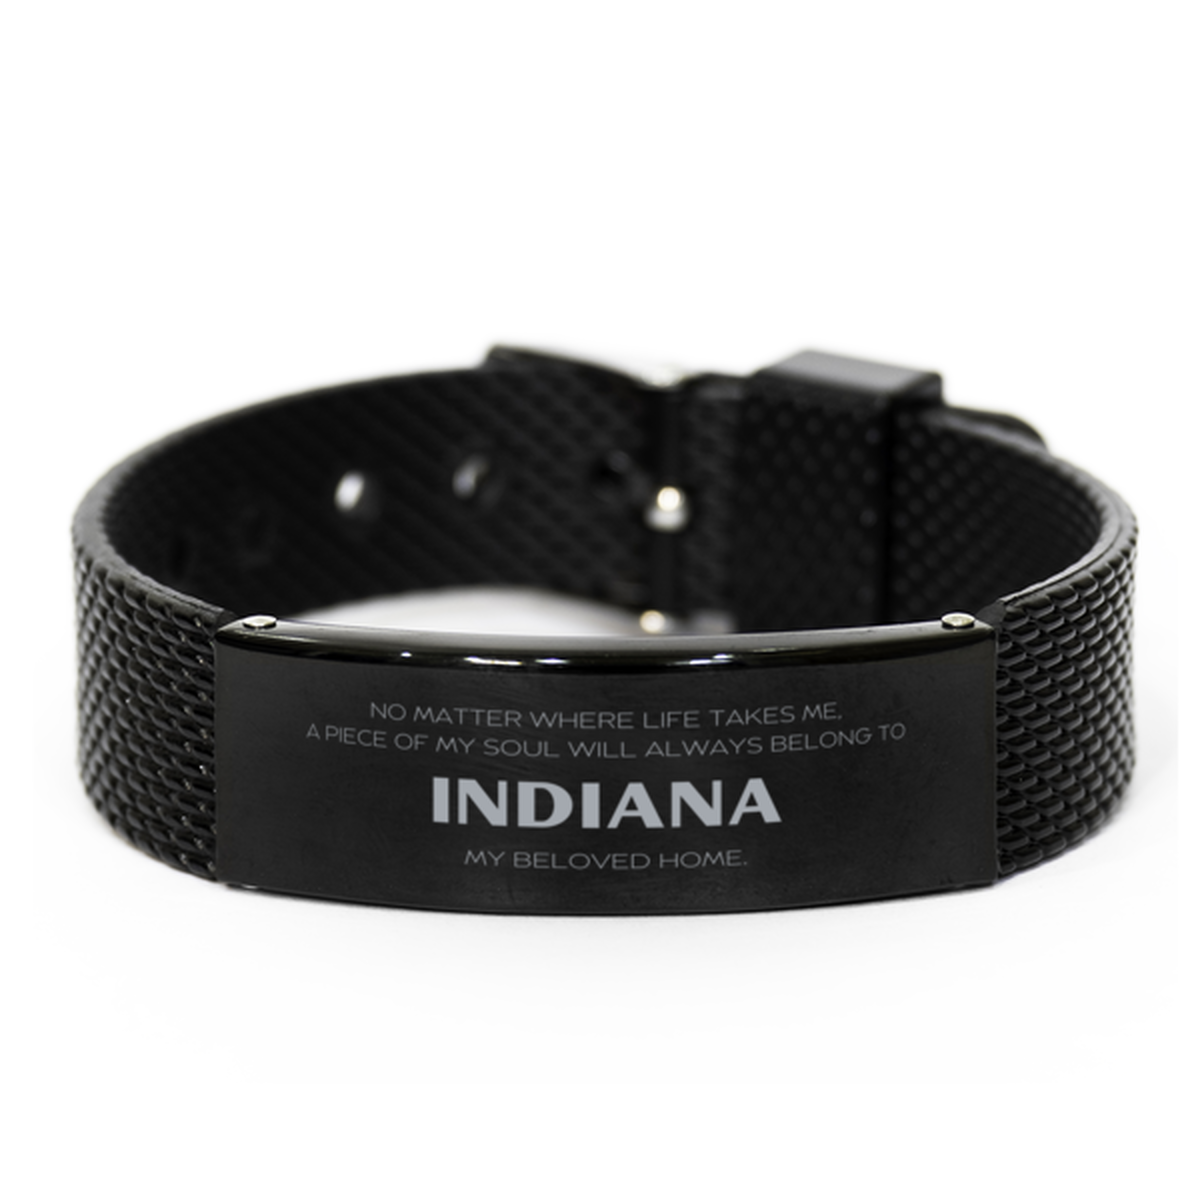 Love Indiana State Gifts, My soul will always belong to Indiana, Proud Black Shark Mesh Bracelet, Birthday Unique Gifts For Indiana Men, Women, Friends